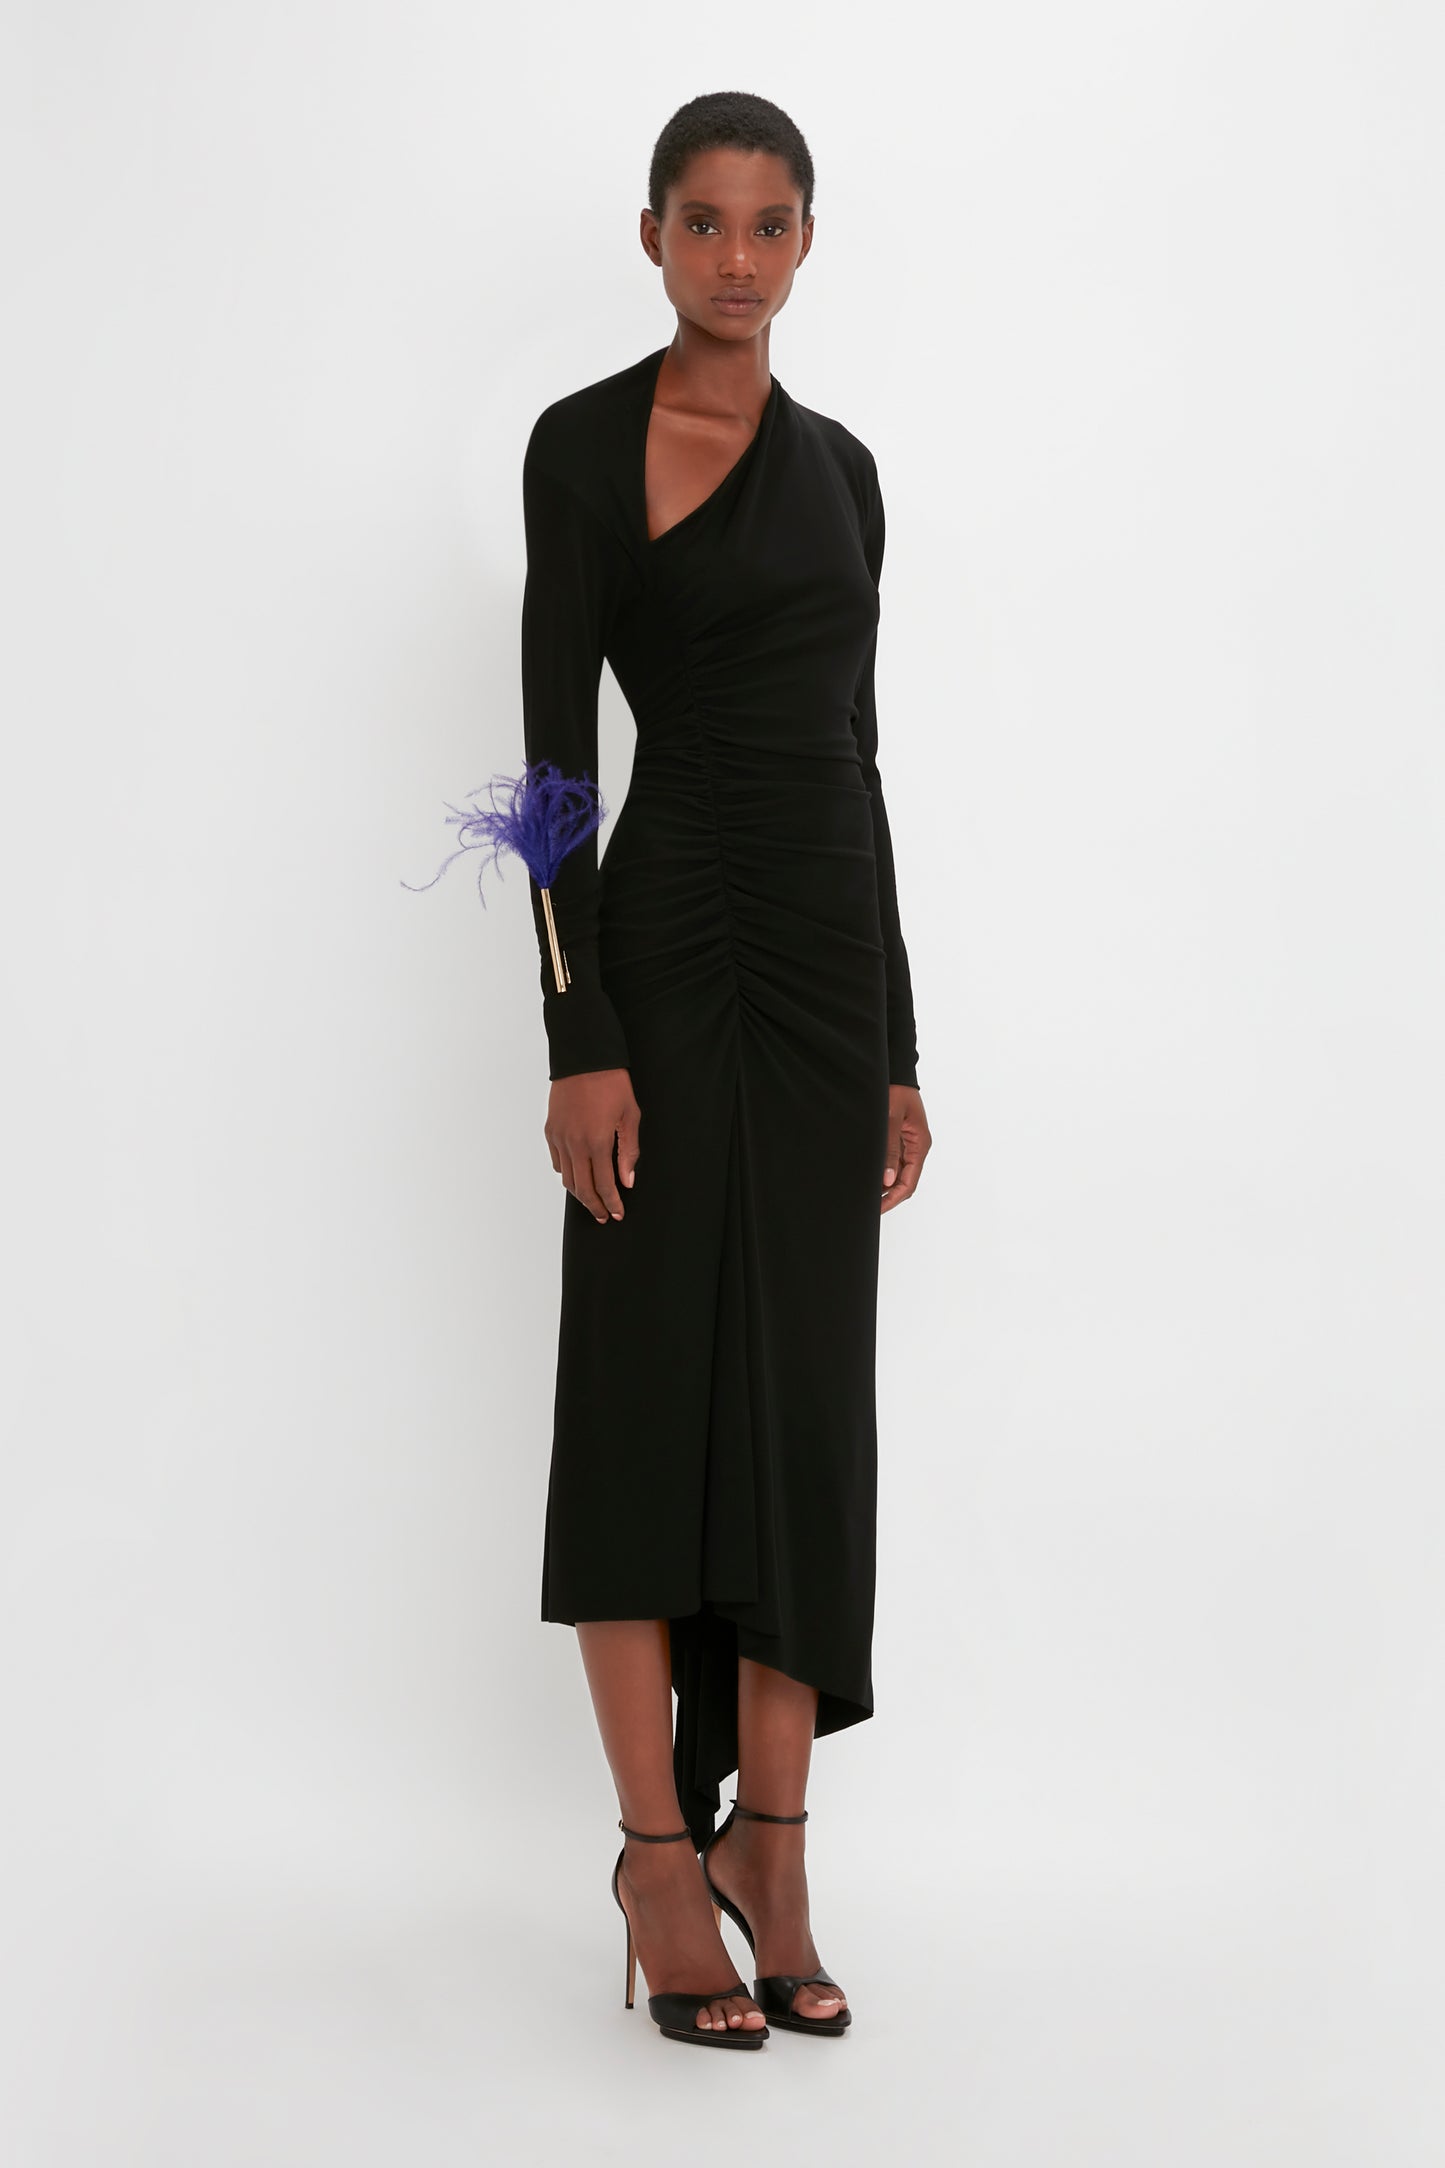 A woman models a Victoria Beckham black gown with ruched details and a blue feather accent on the wrist, paired with black strappy heels.